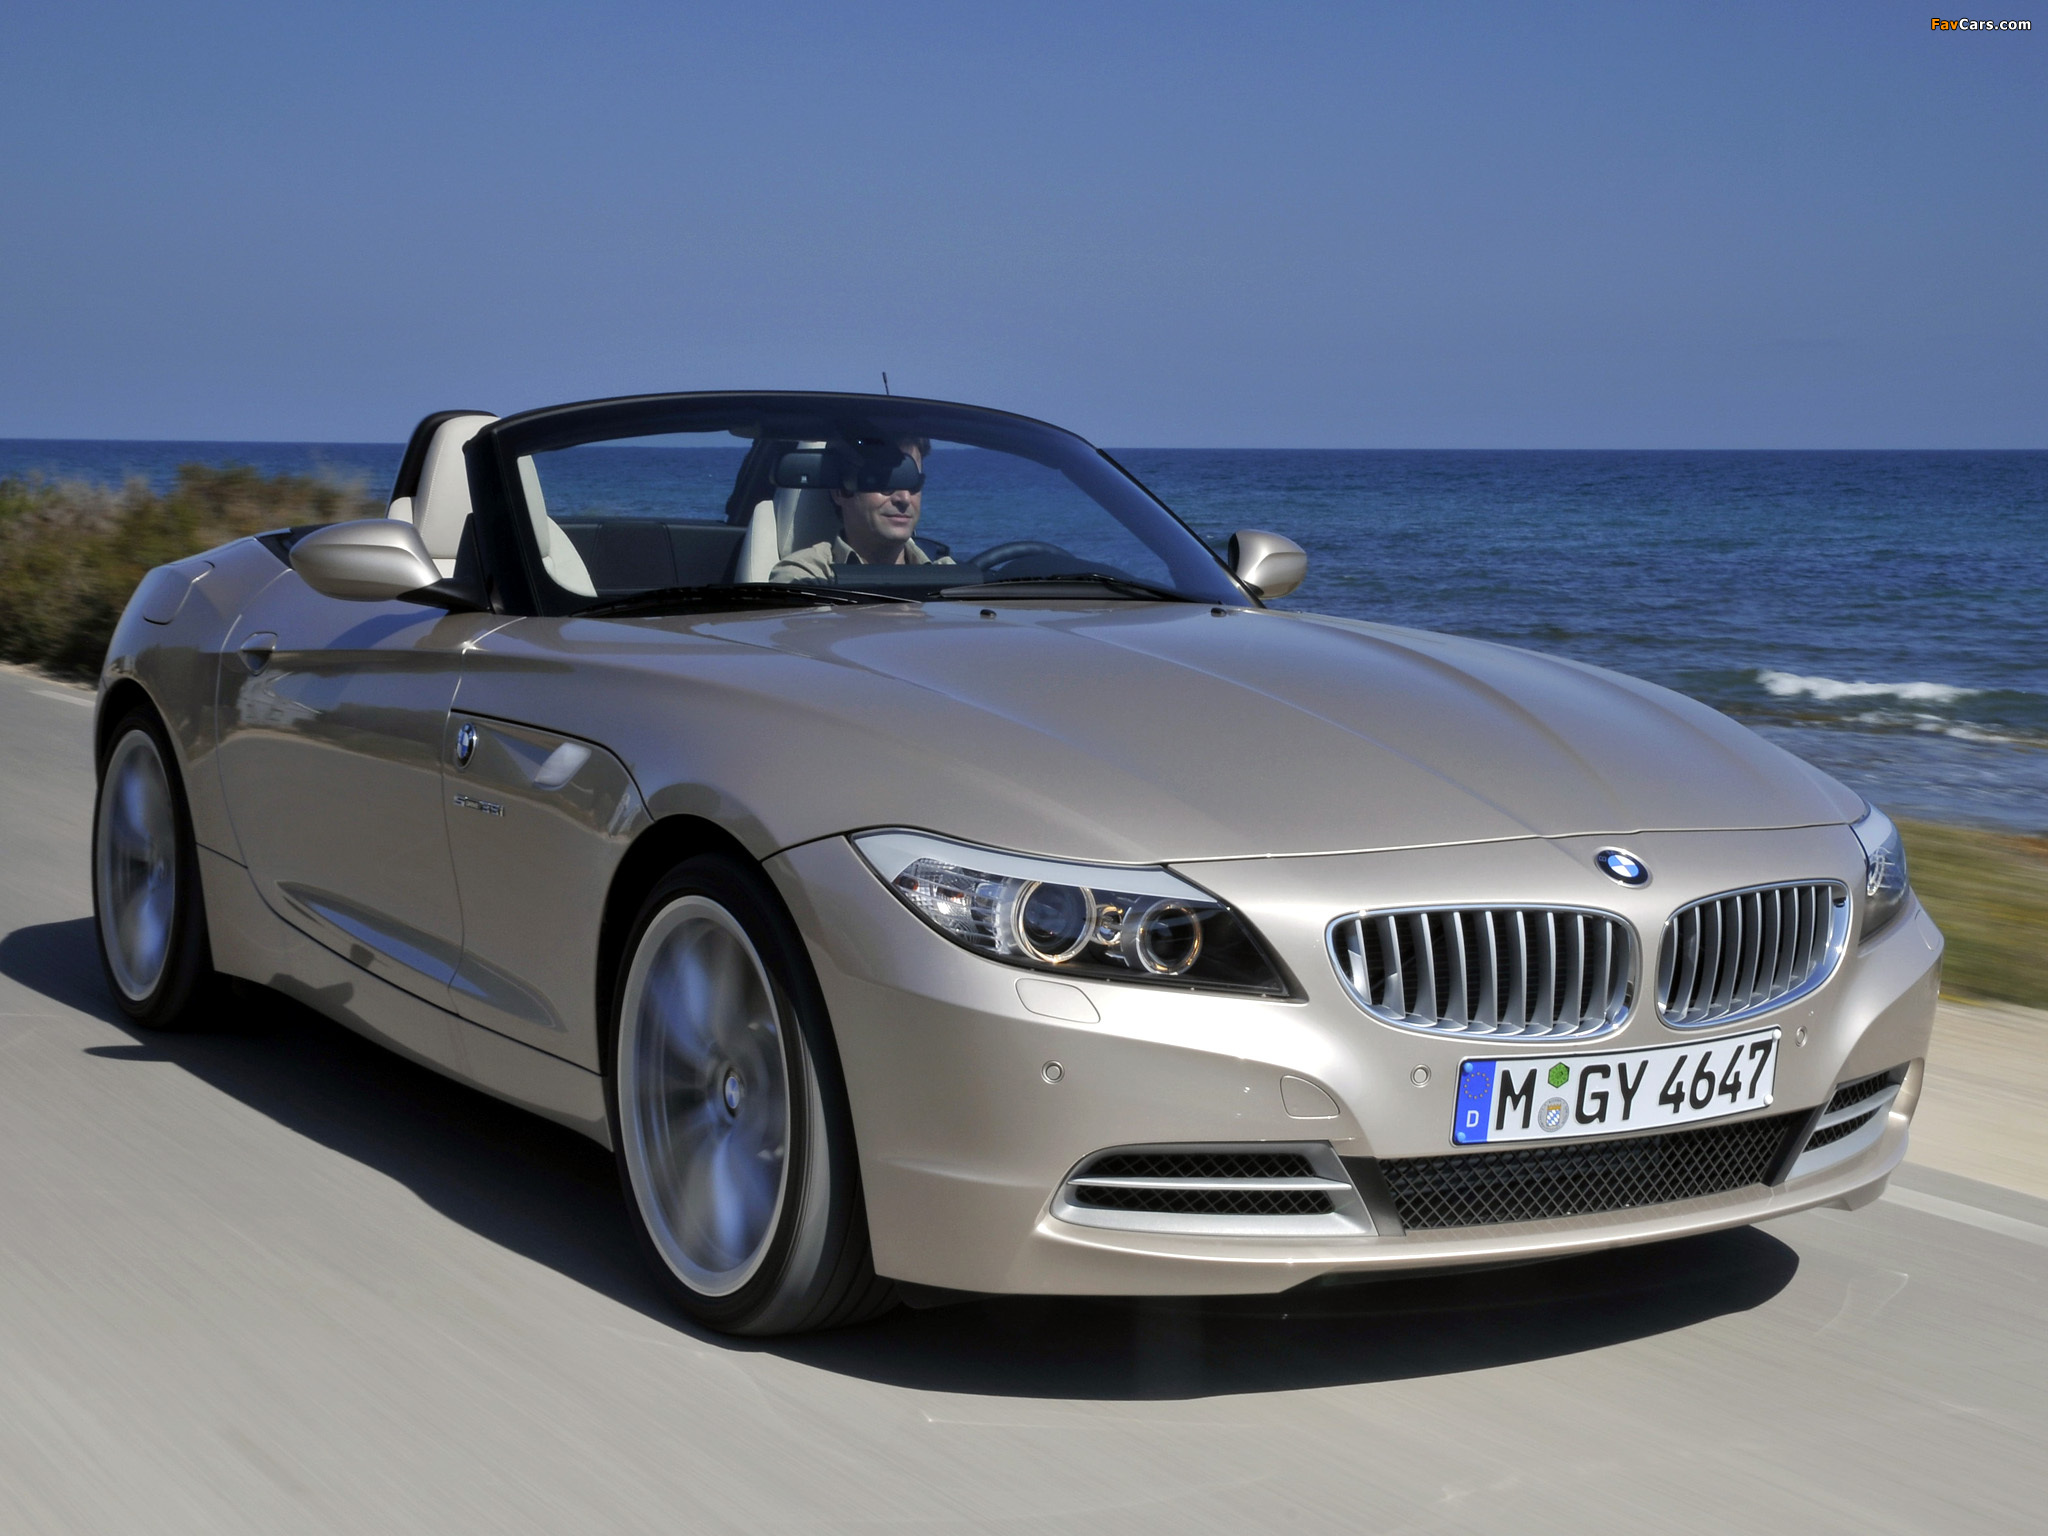 BMW Z4 sDrive35i Roadster (E89) 2009 pictures (2048 x 1536)